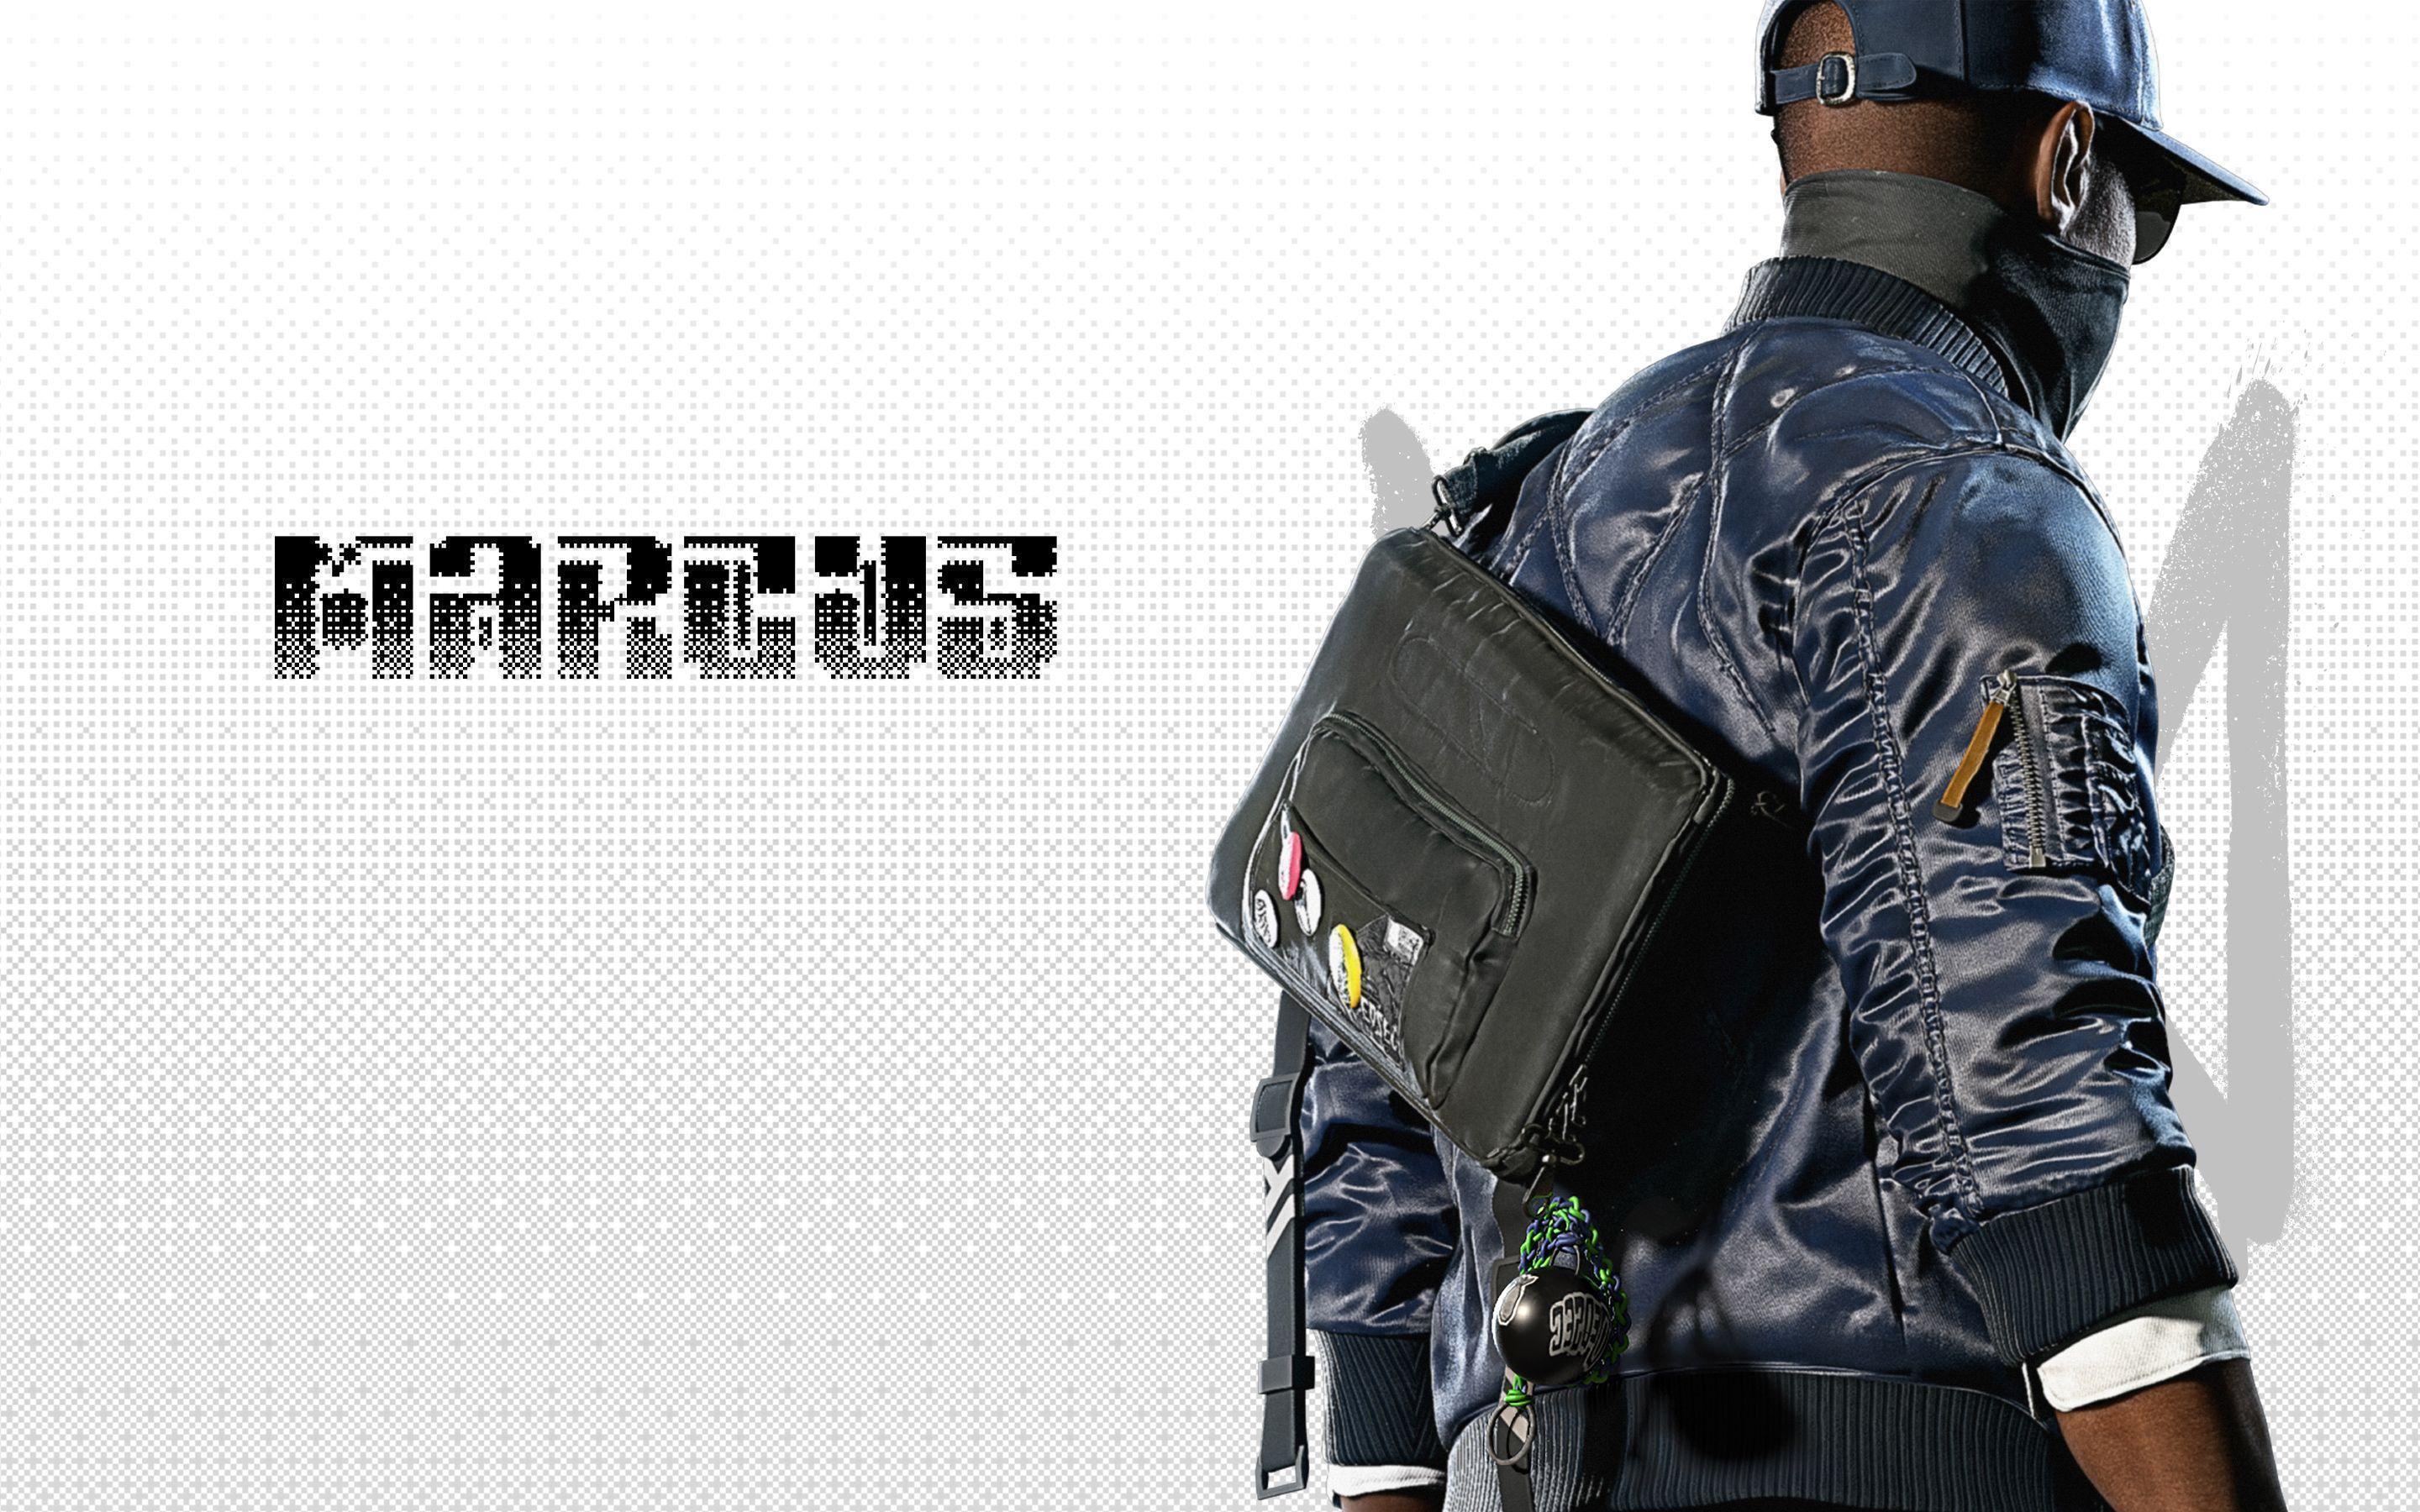 Marcus Holloway Watch Dogs 2 Wallpaper